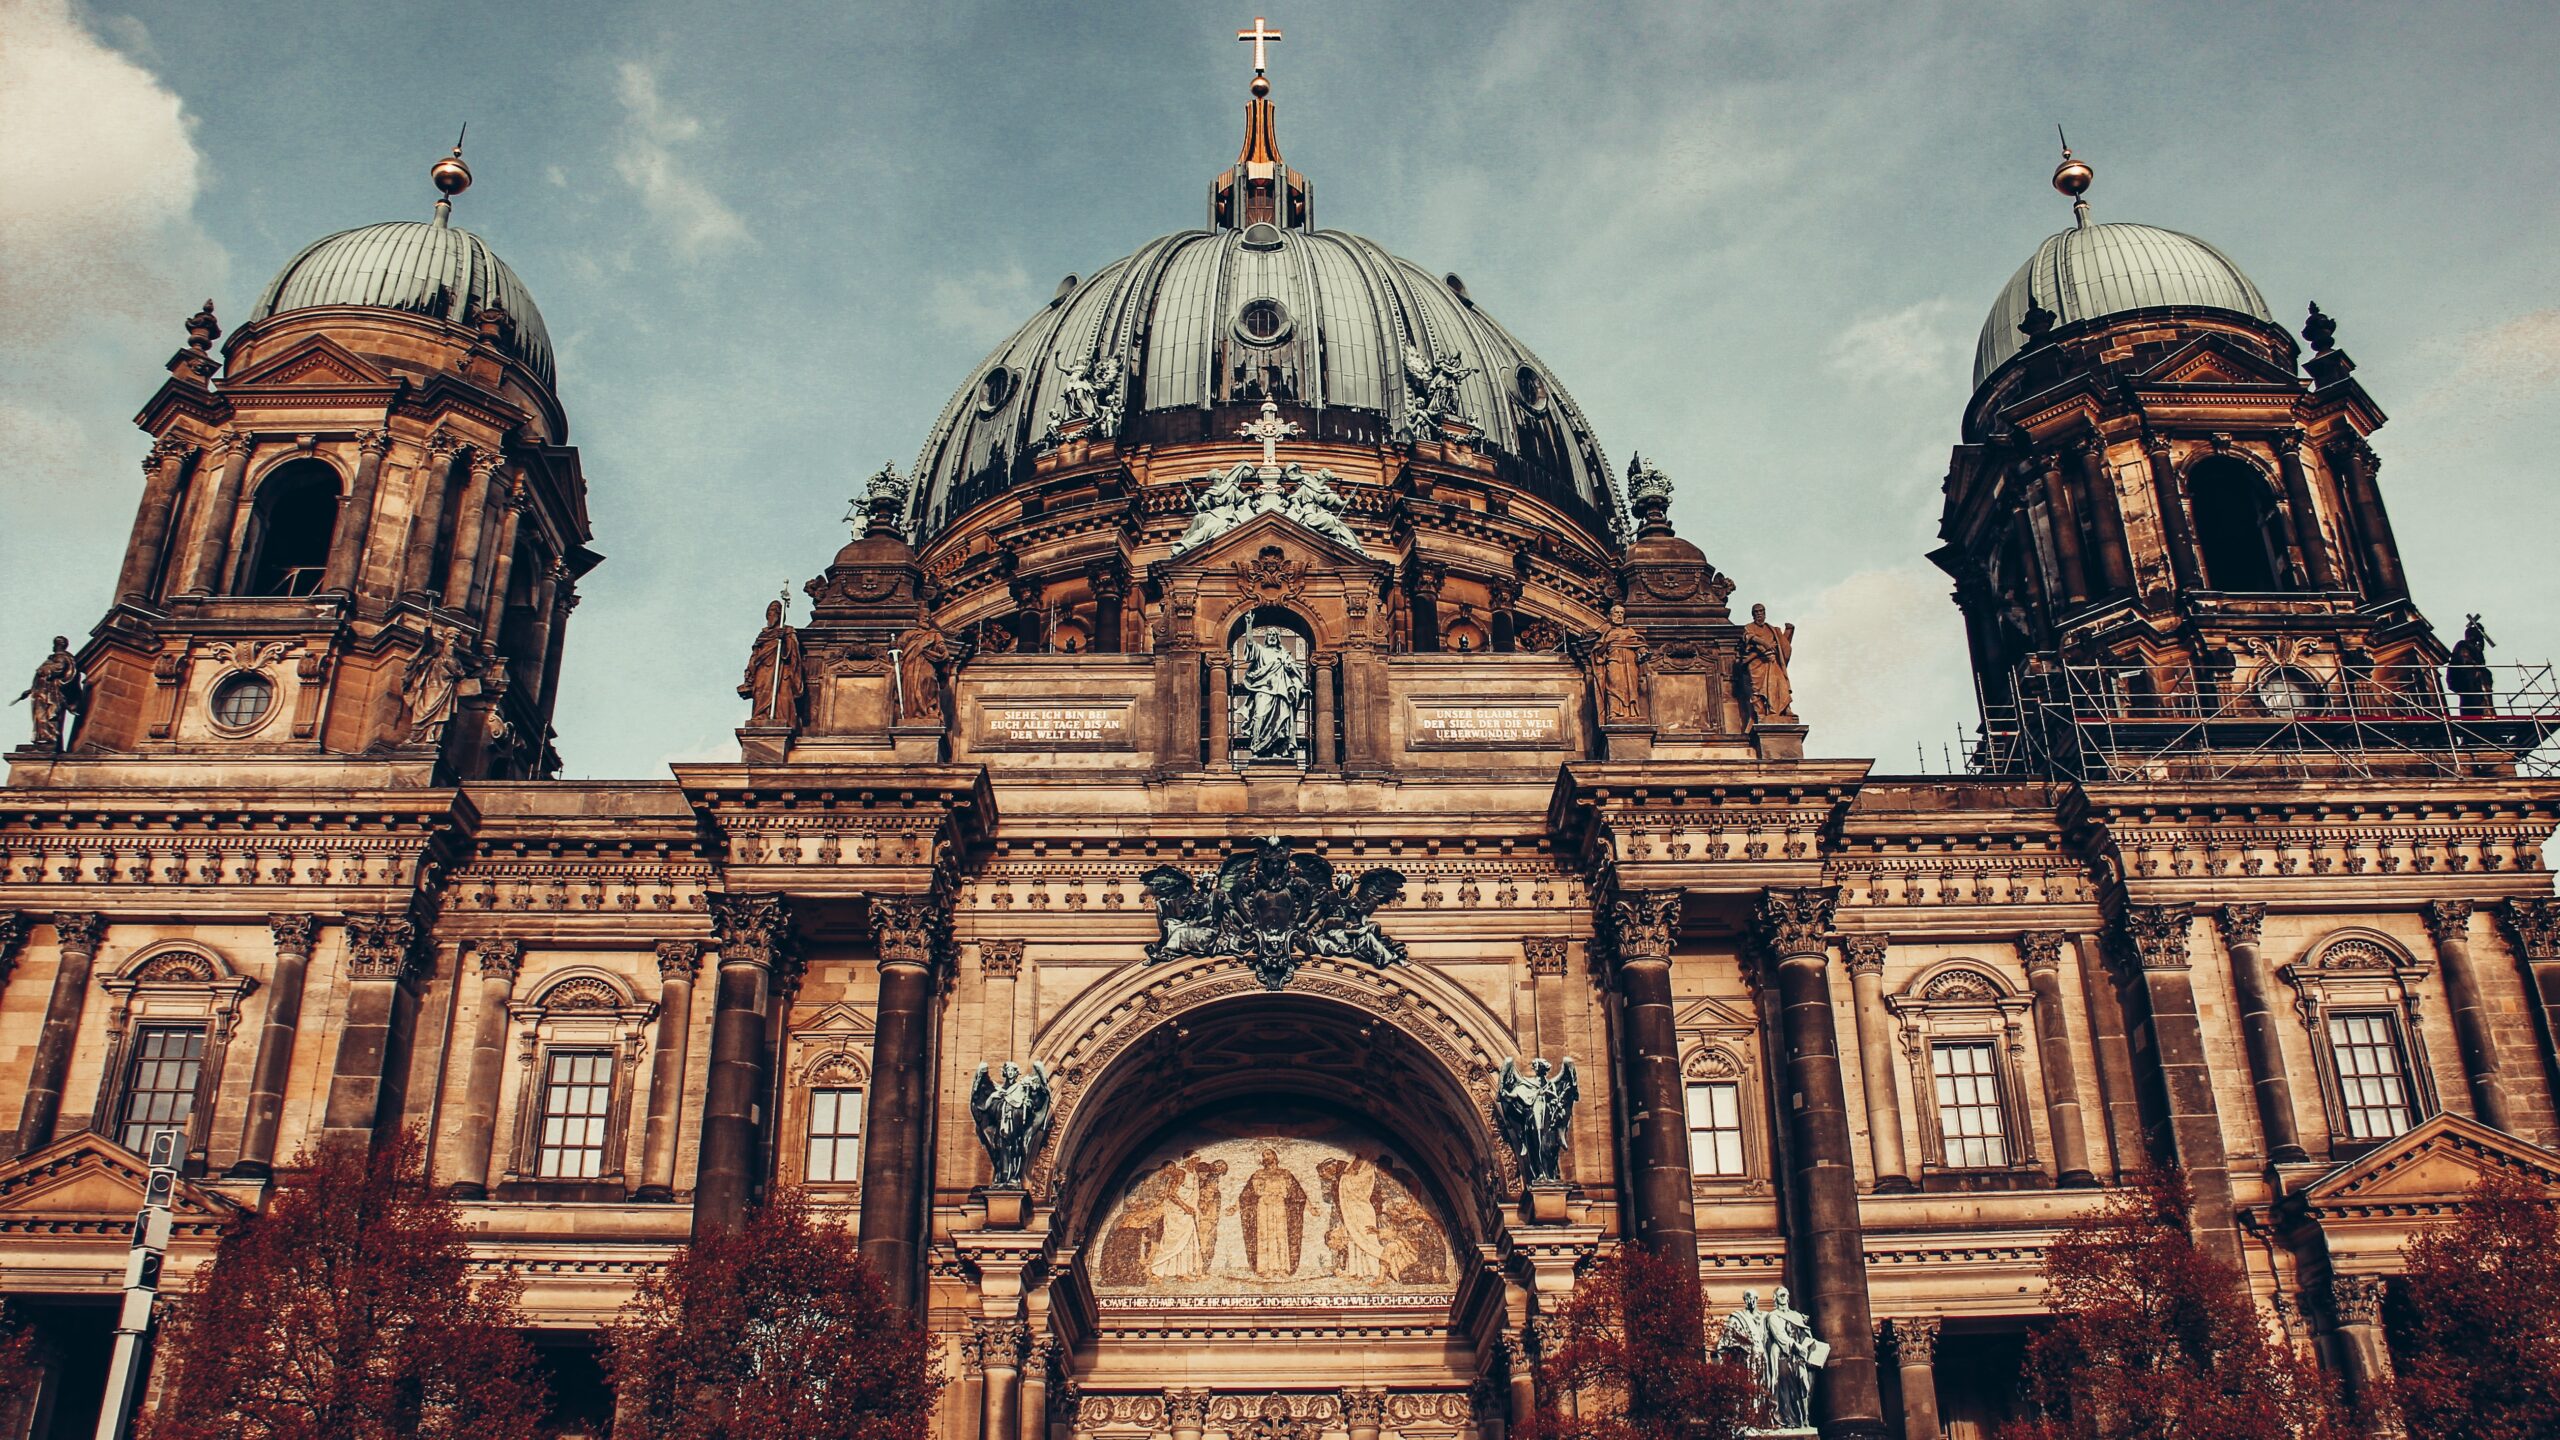 the Berlin cathedral